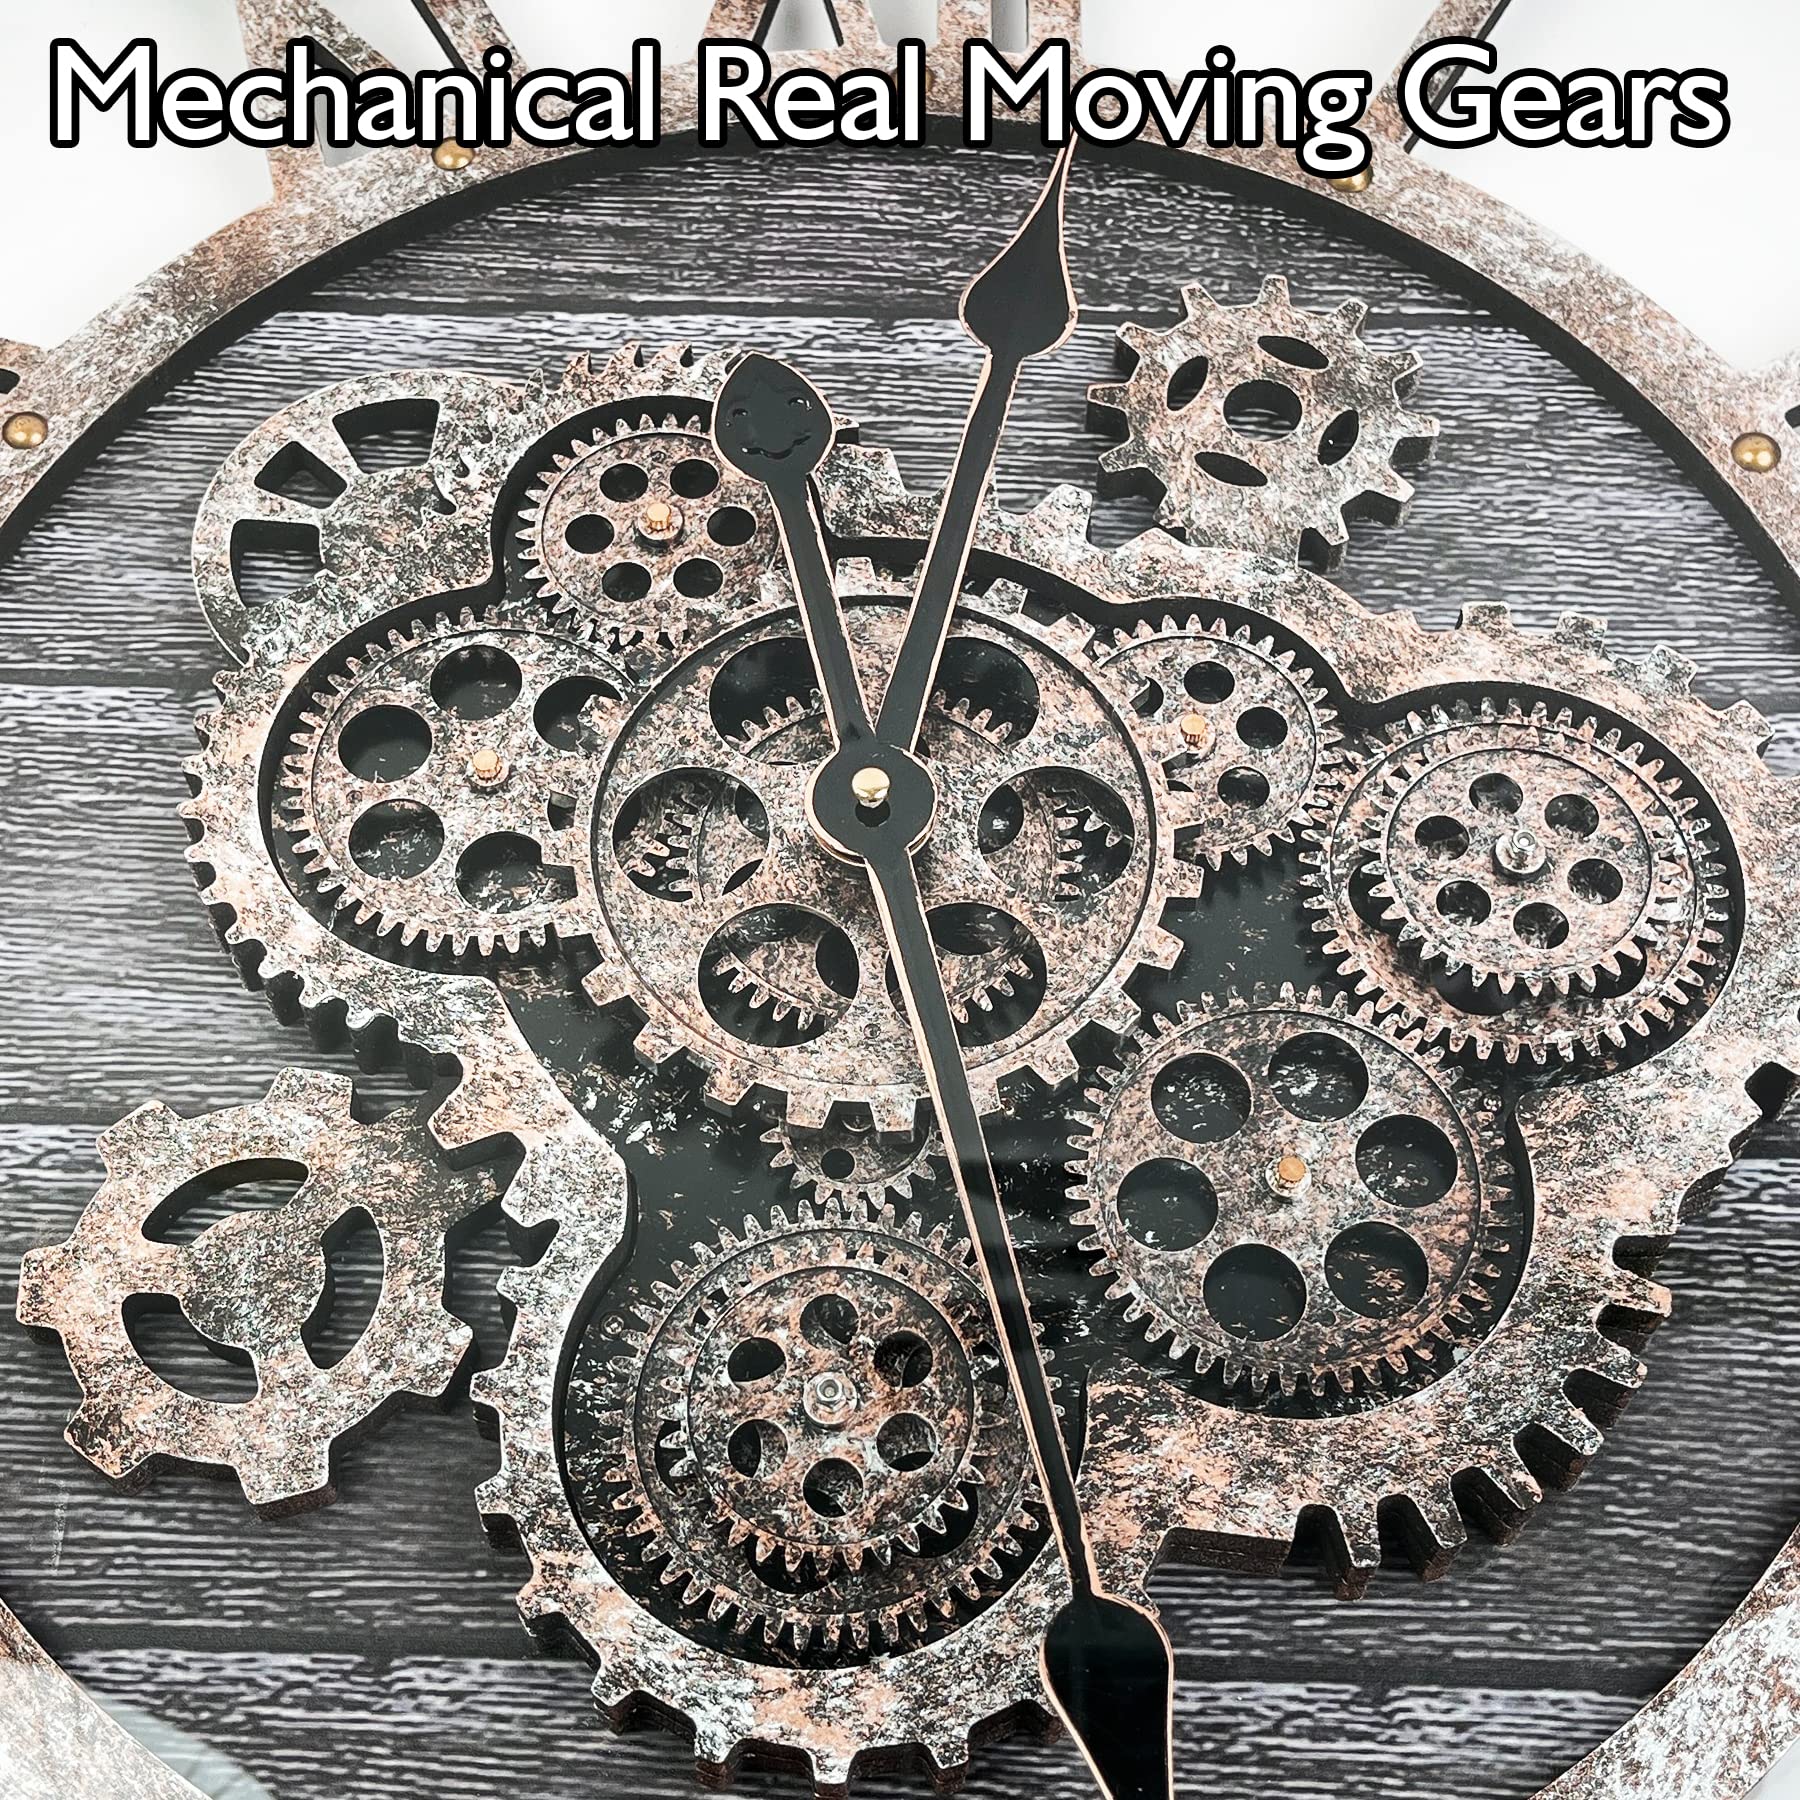 27 inch Large Real Moving Gears Wall Clock with Toughened Glass Cover Oversized Vintage Solid Wood Farmhouse Clock Giant Decorative Rustic Wall Clock